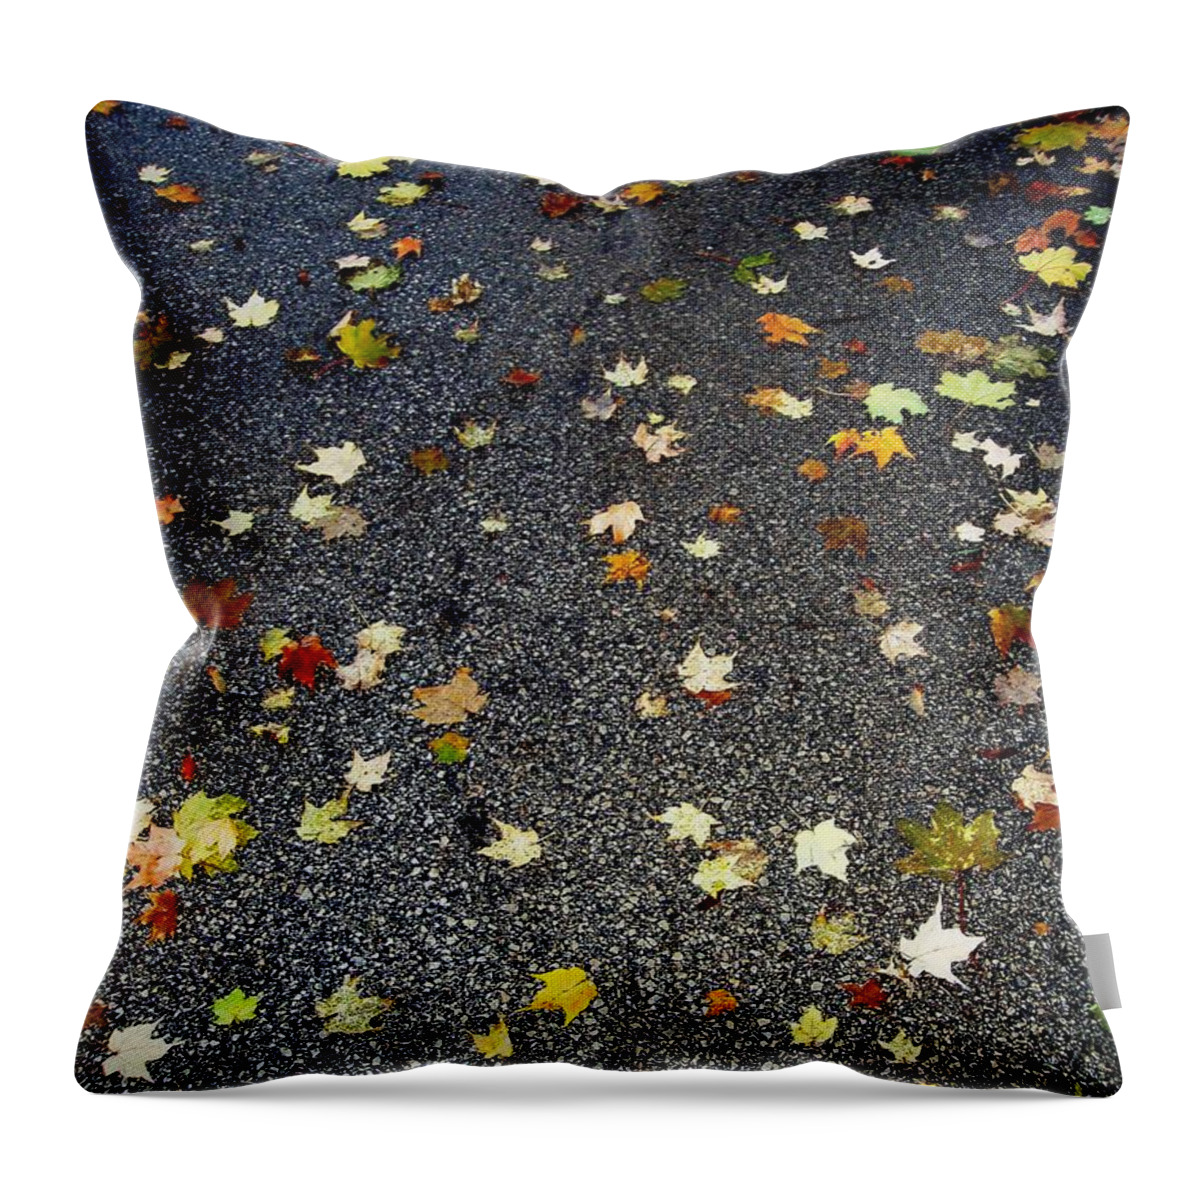 Leaves Throw Pillow featuring the photograph Fall Sparkle by Deborah Crew-Johnson